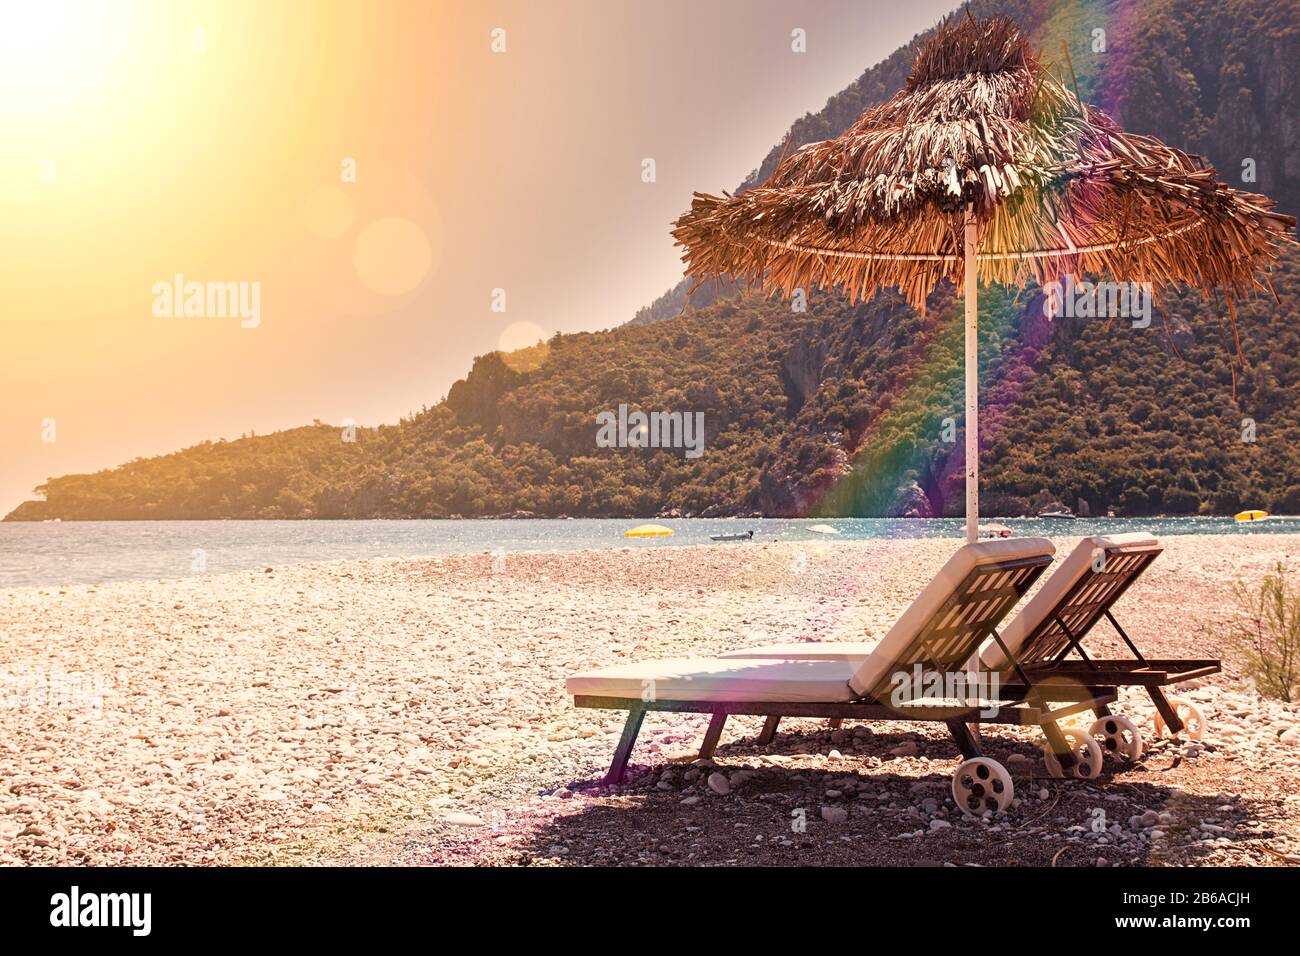 Sunshades and chaise lounges on beach. Summer seascape. Tinted toned coloration image. Selective focus Stock Photo